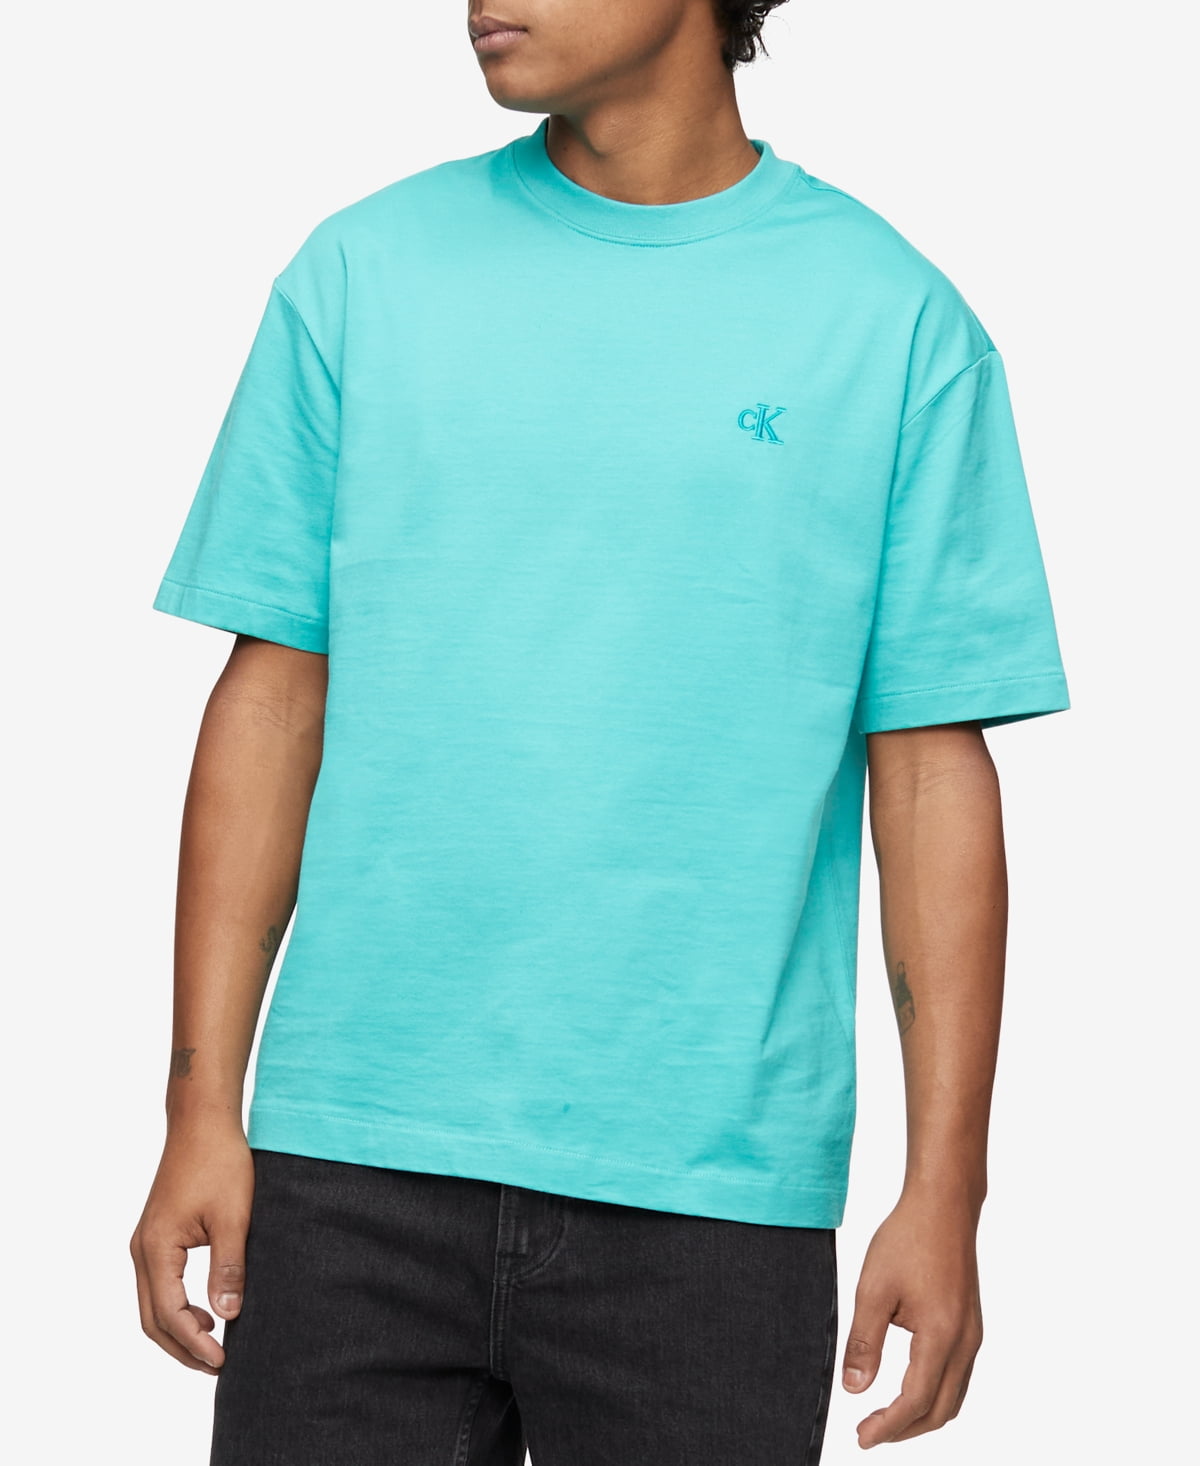 Archive Small Crewneck Turquoise, Klein Logo T-Shirt, Relaxed Men\'s Fit Calvin